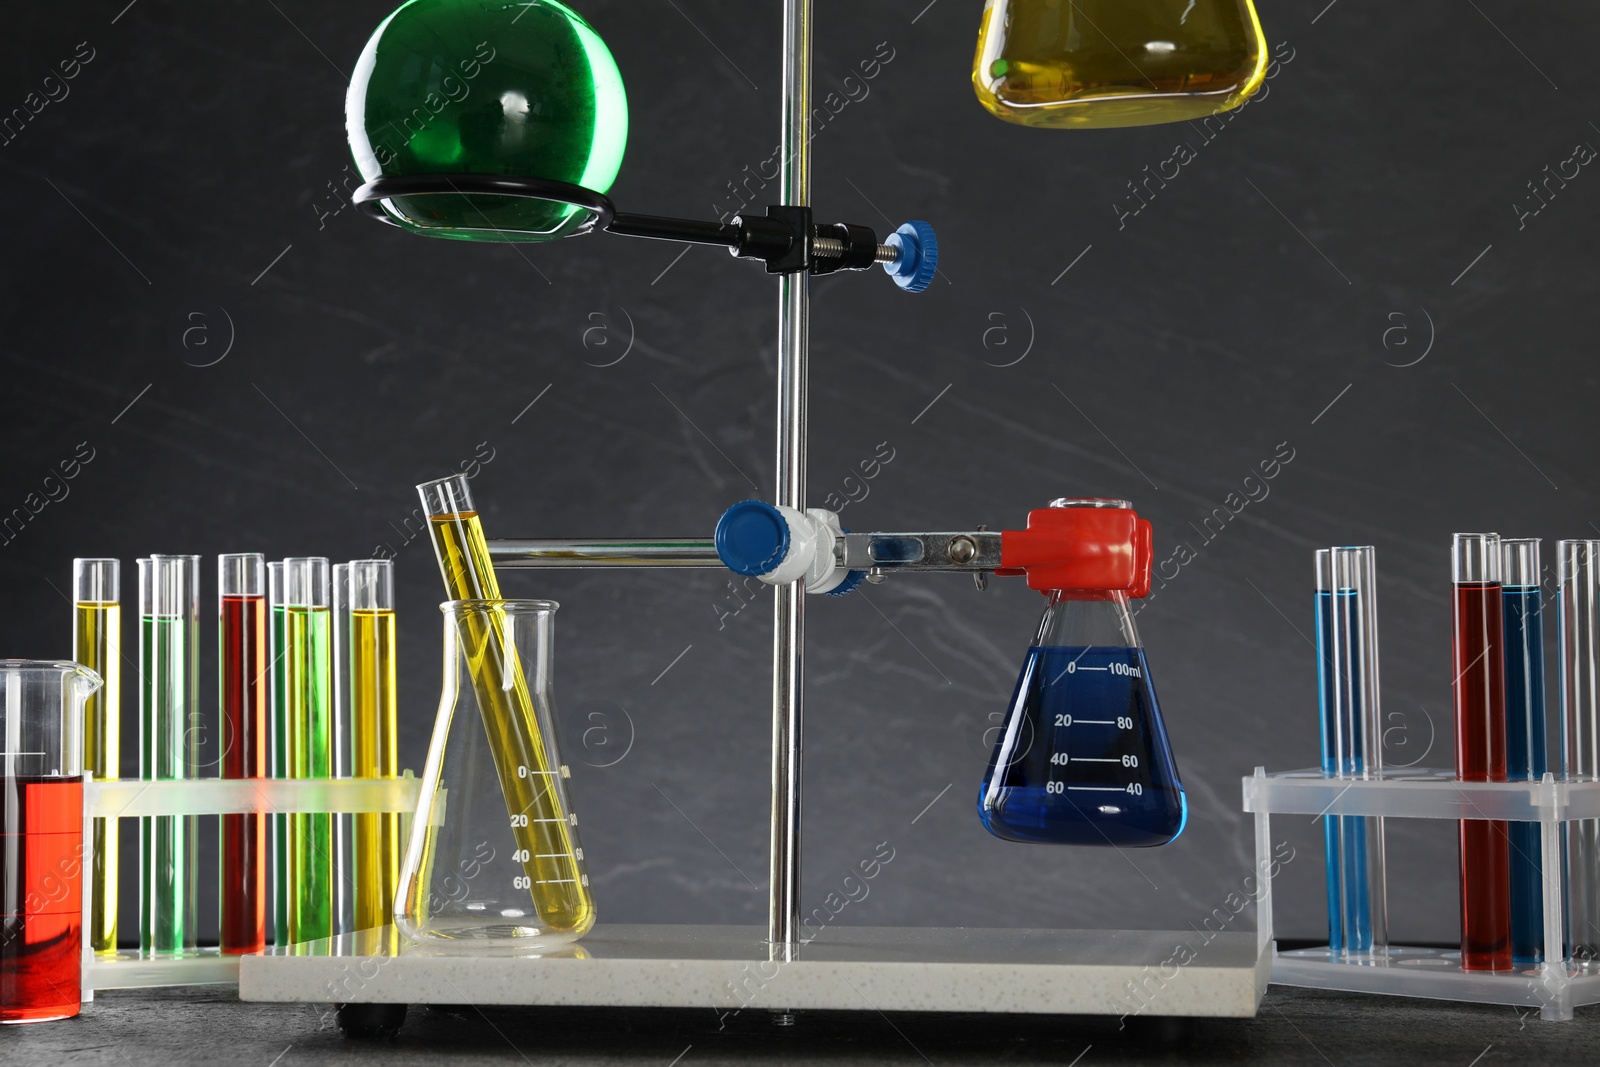 Photo of Retort stand and laboratory glassware with liquids on table against grey background